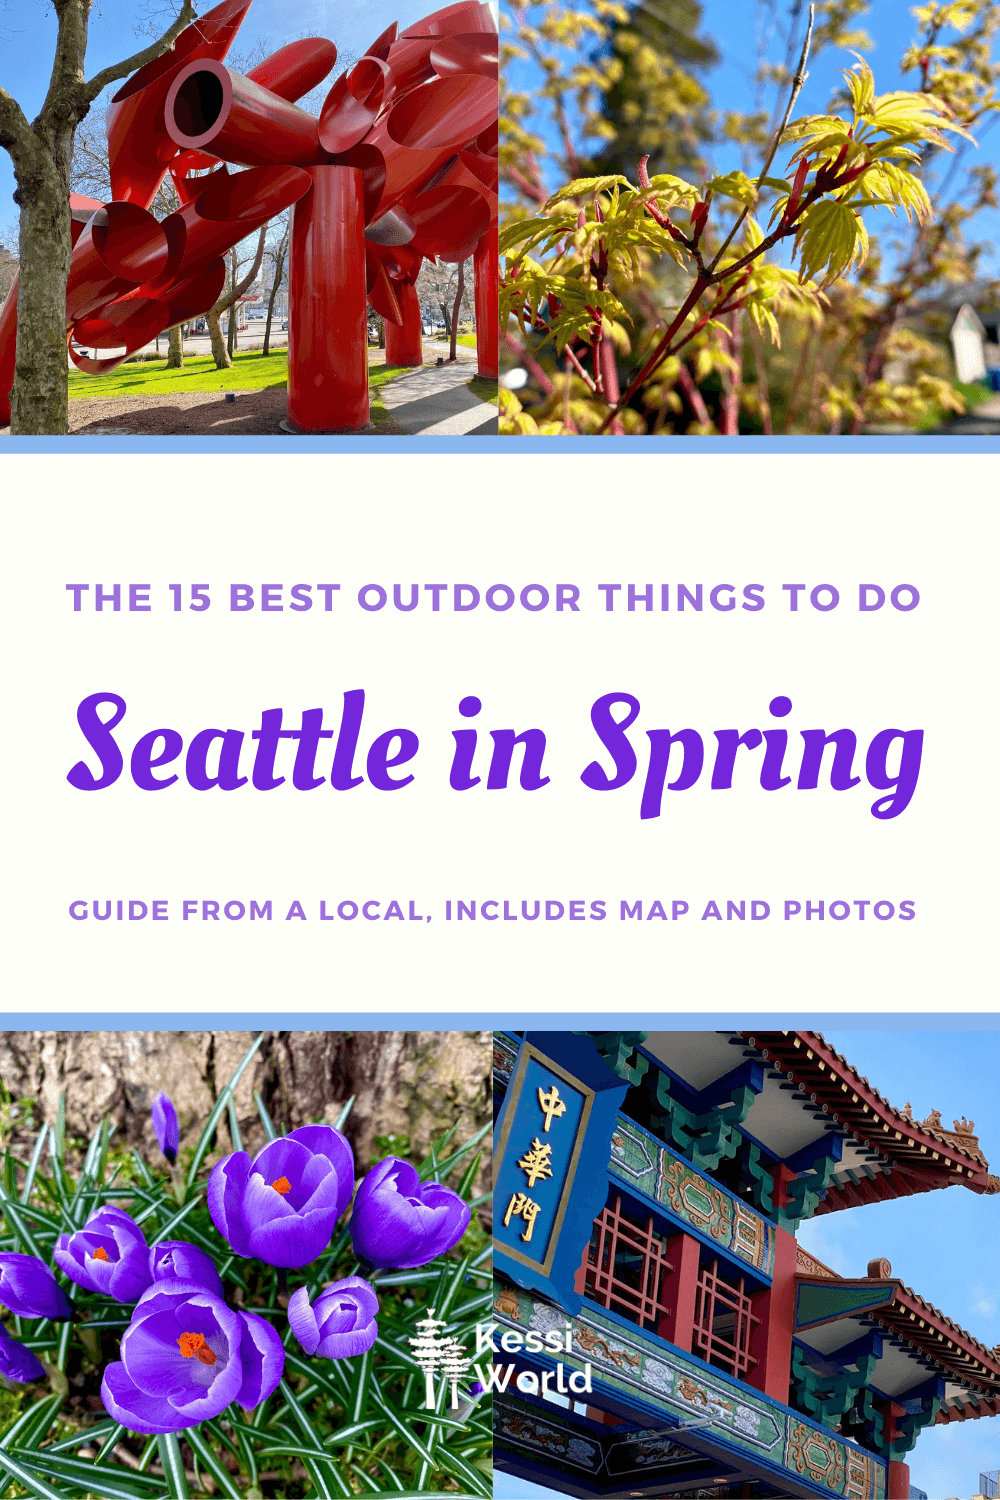 This Pinterest pin shows four small photos of different things to do in the outdoors in spring in Seattle. 